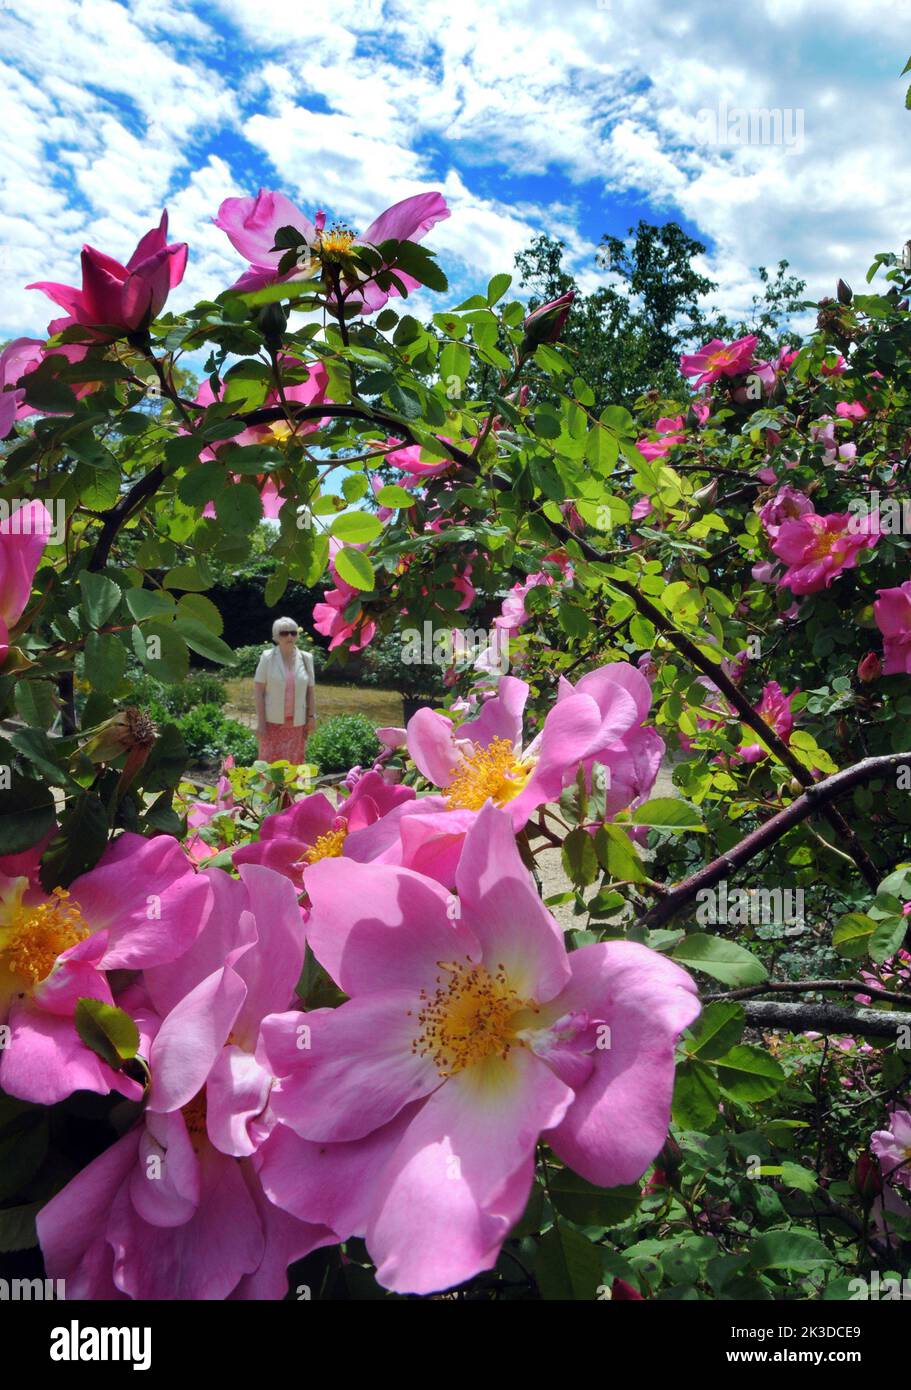 English roses bloom in the June sunshine at the gardens at the National Trust's Mottisfont Abbey, near Romsey, Hampshire where visitors to the renowned rose gardens enjoyed the warm weather. Pic Mike Walker, Mike Walker Pictures,2015 Stock Photo